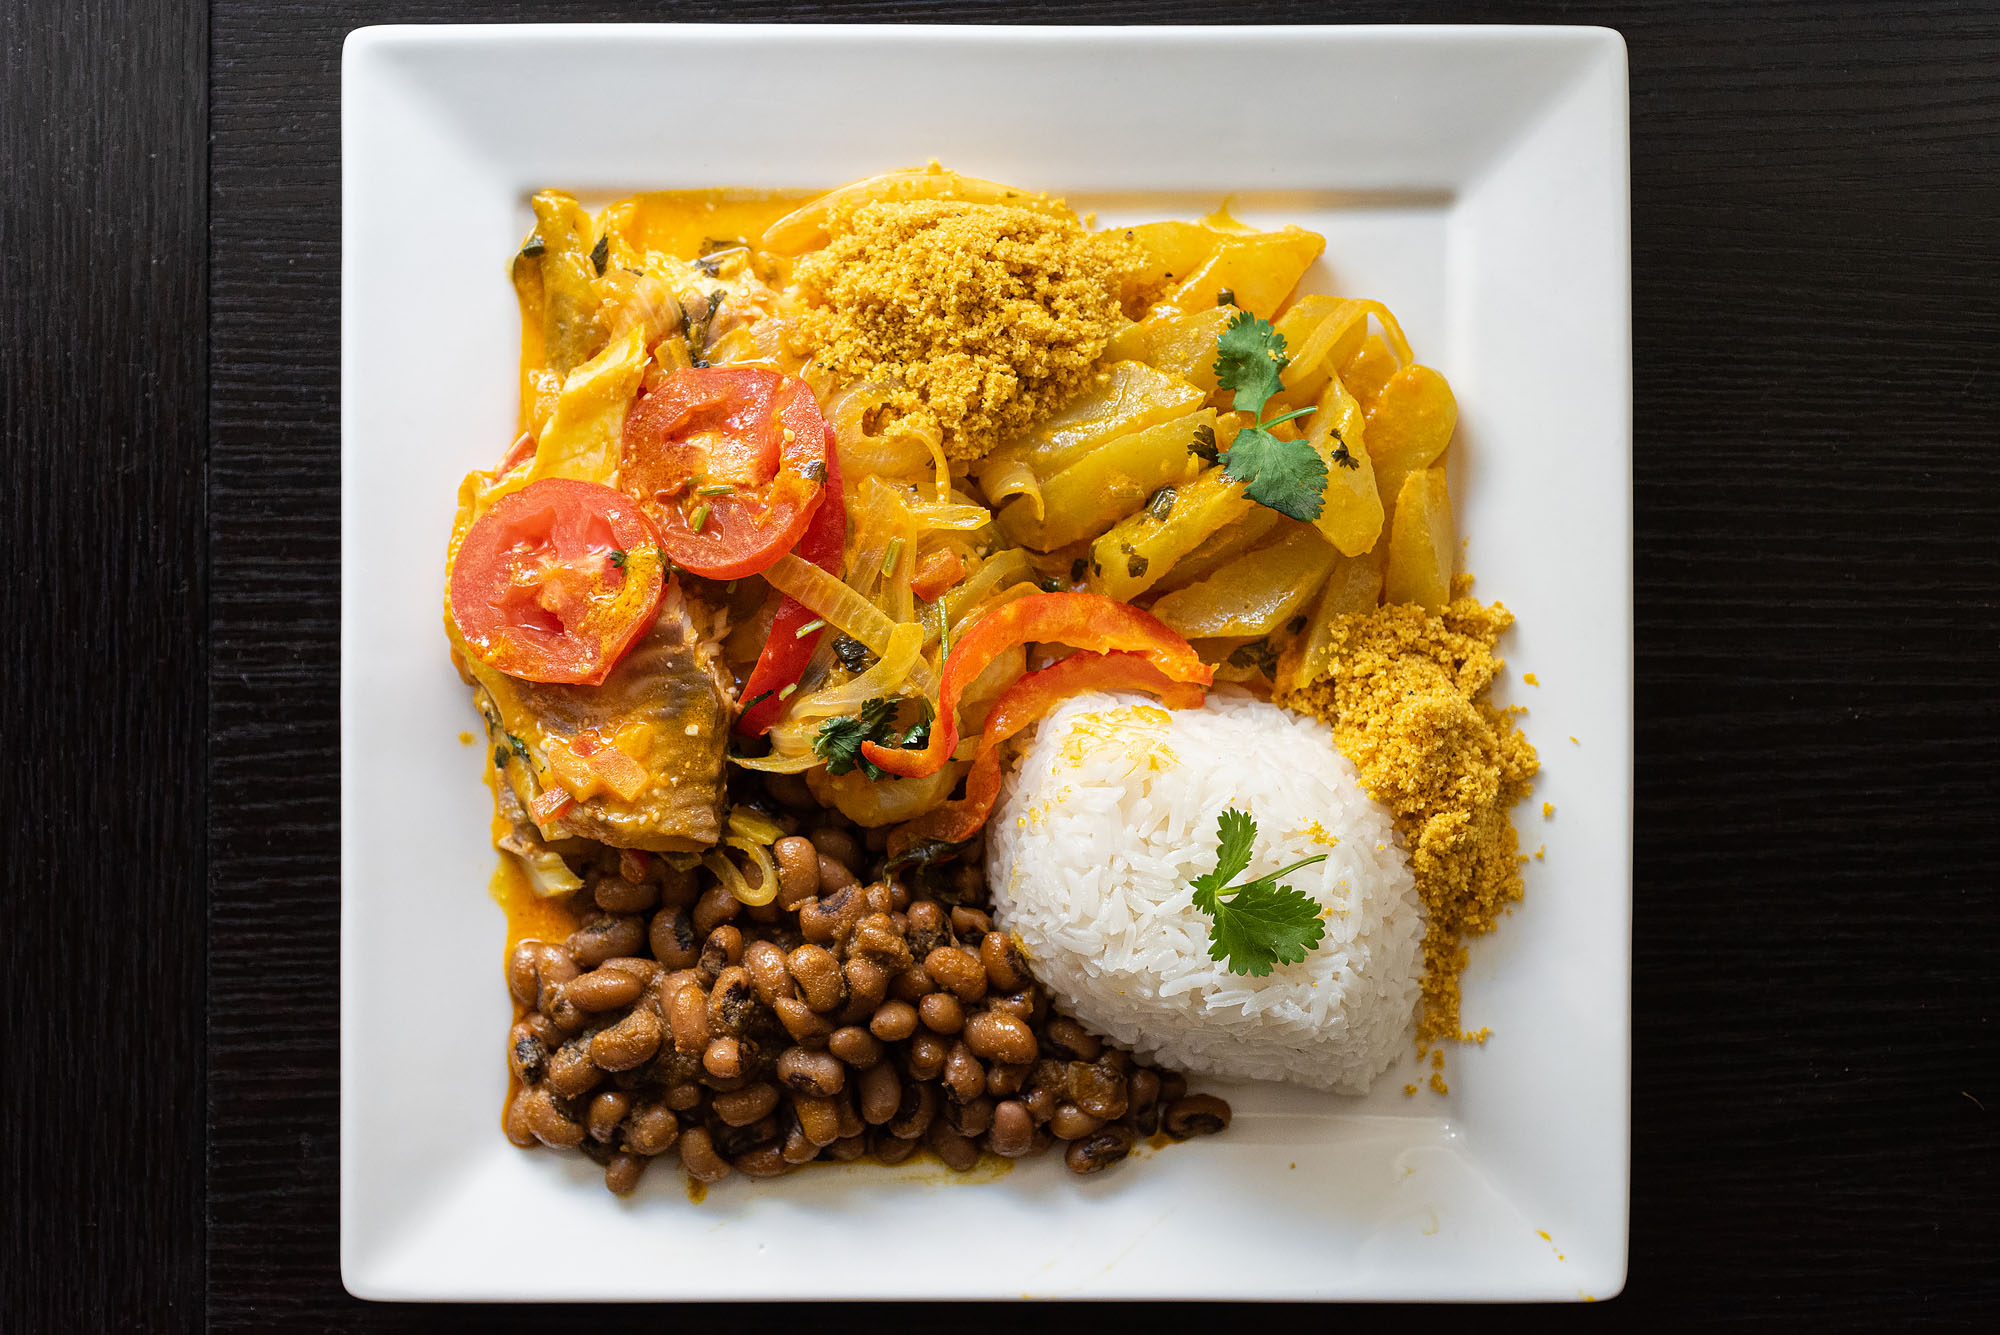 Plate of Brazilian food on a white square plate.